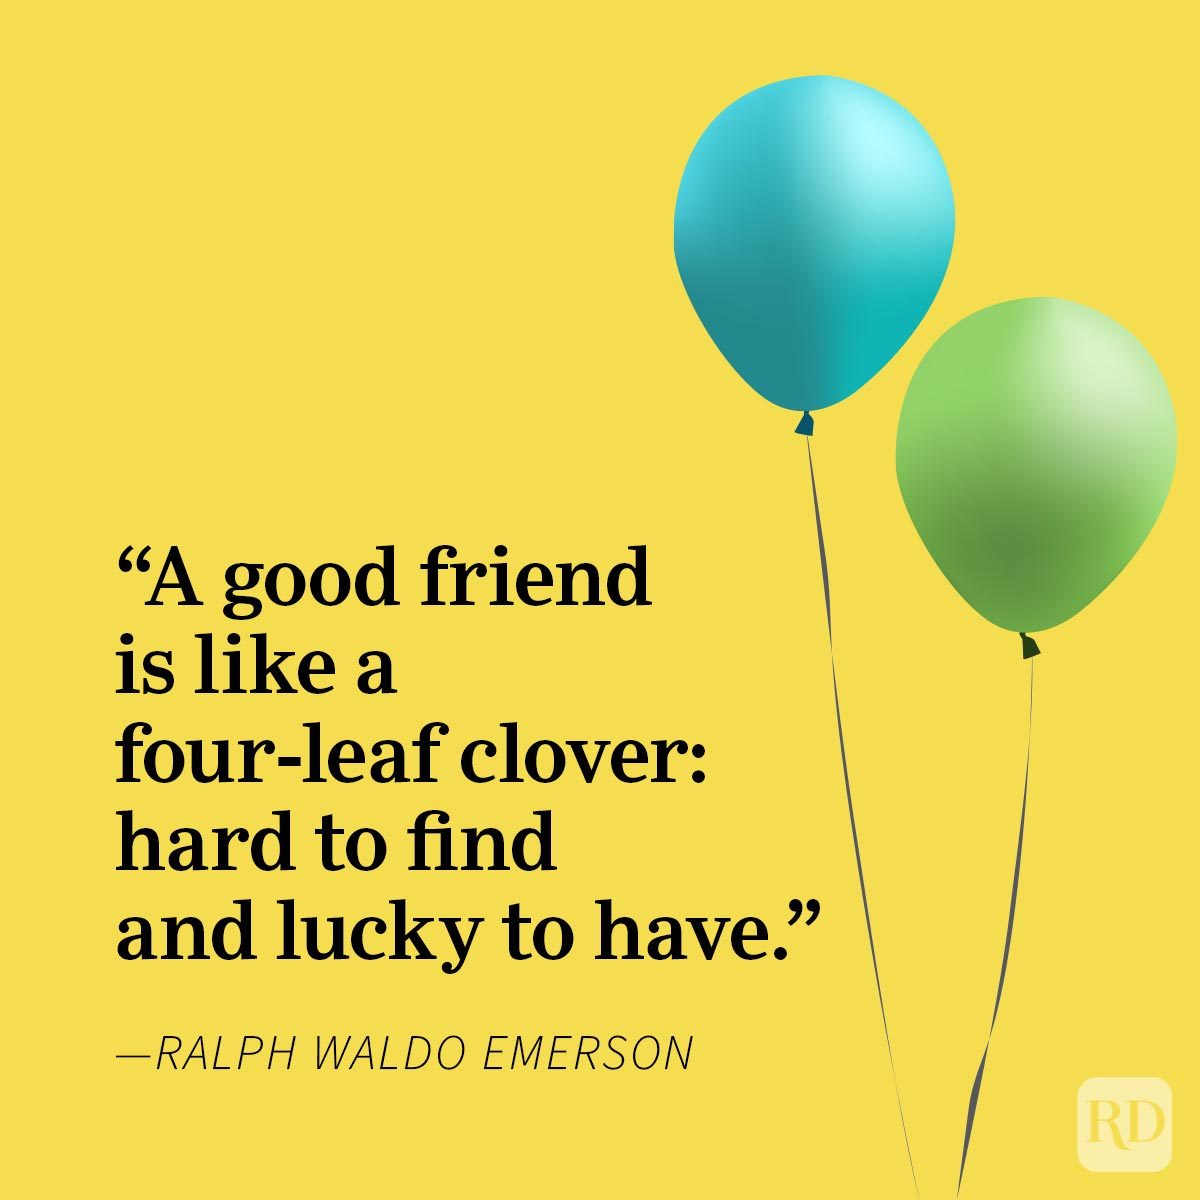 Friendship Quotes To Share With Your Bestie Ralph Waldo Emerson, two balloons flying, yellow